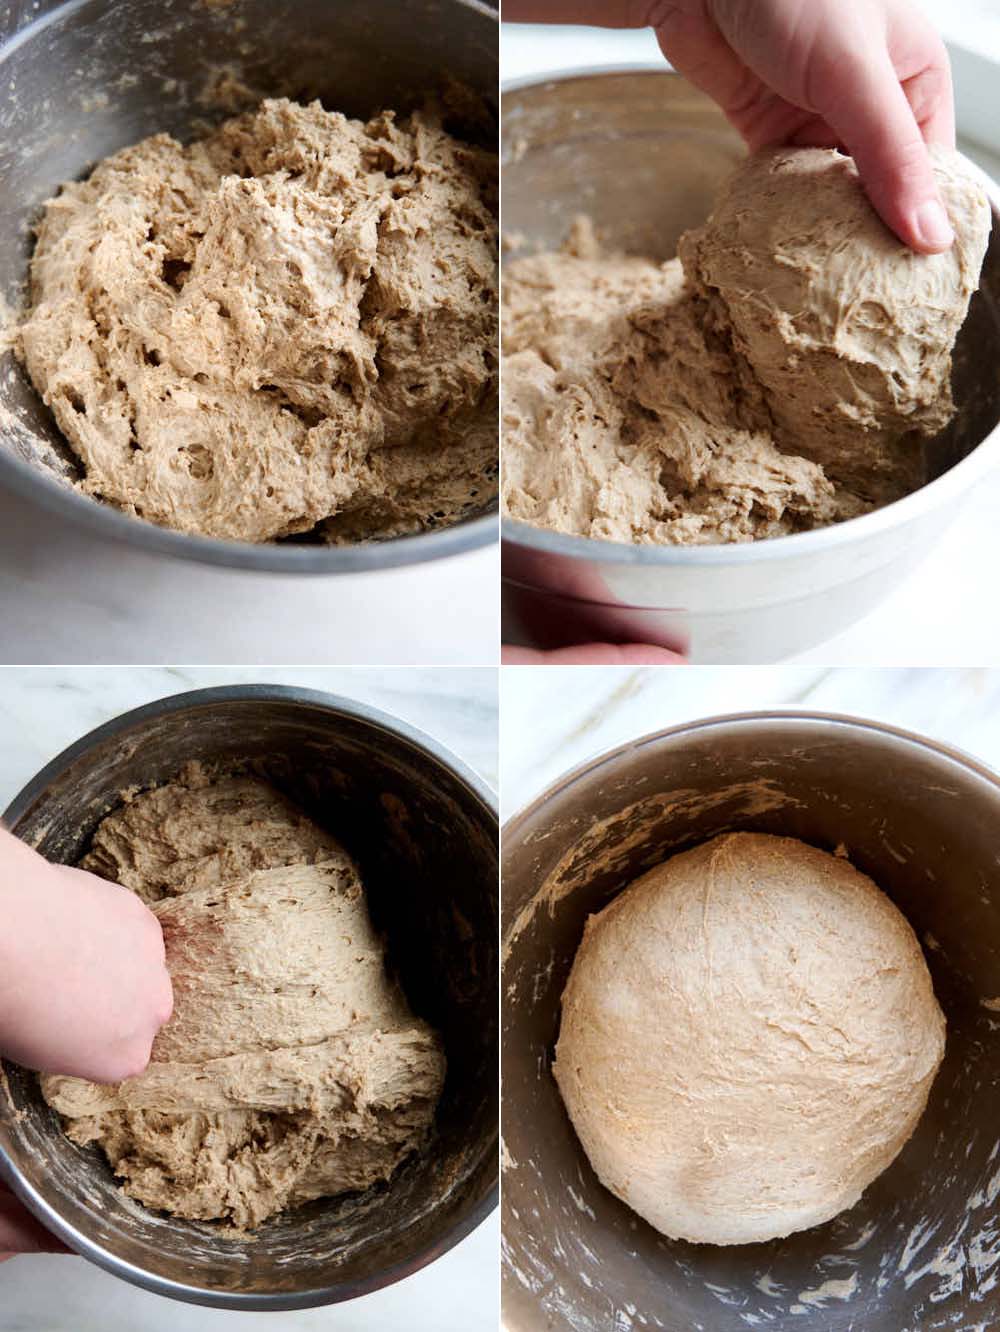 Making rye bread dough stretch and folds.